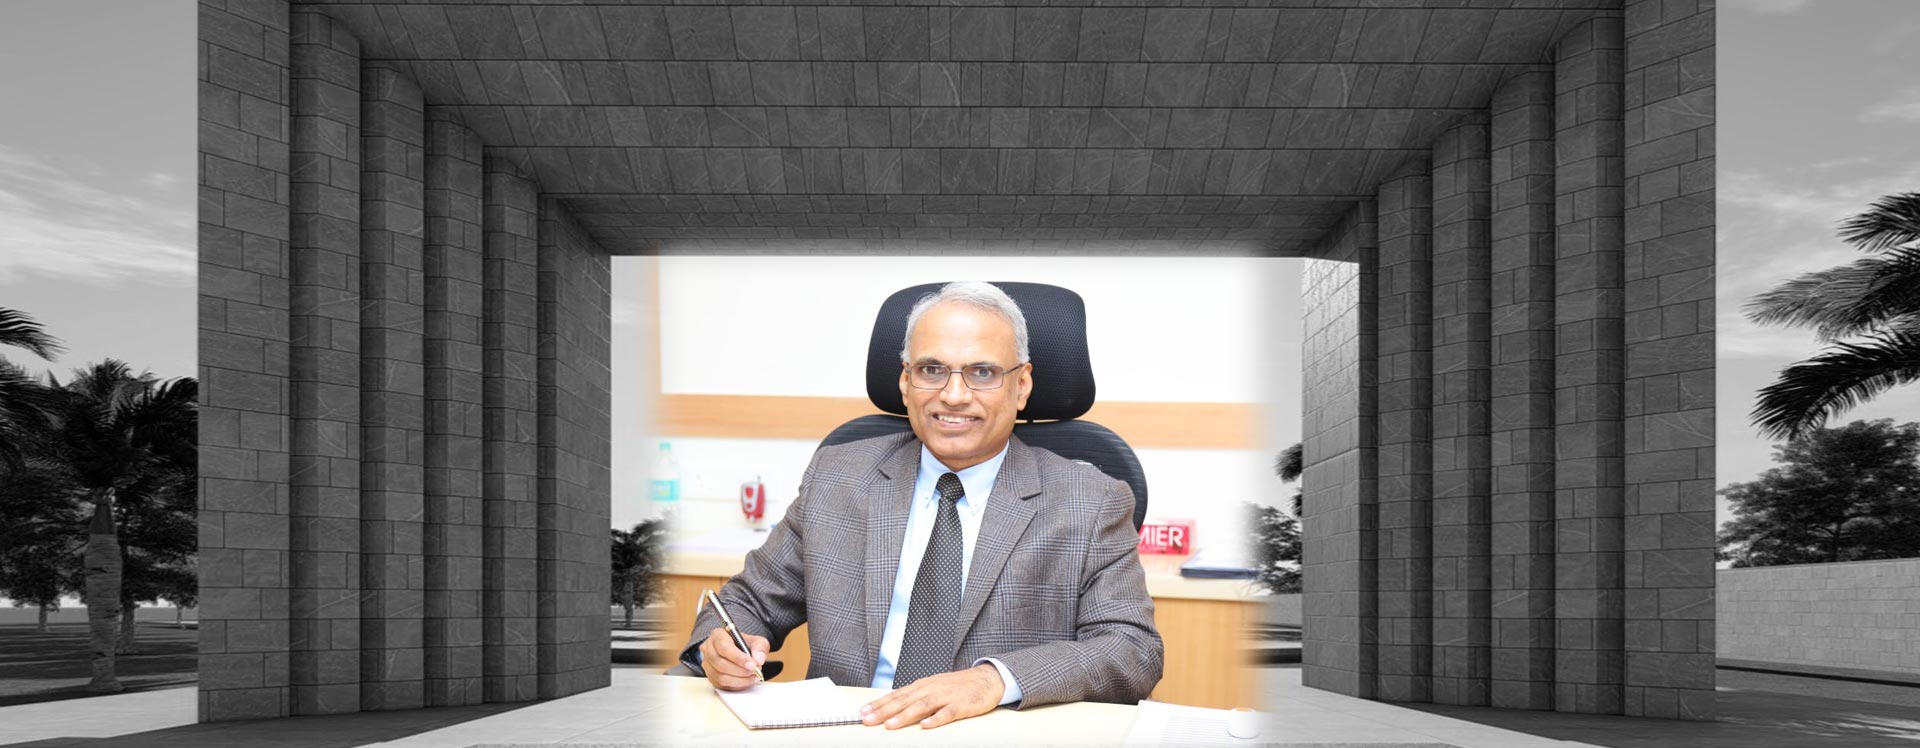 Founding Director of IIMV, Prof. M Chandrasekhar, appointed as the Director for a second term